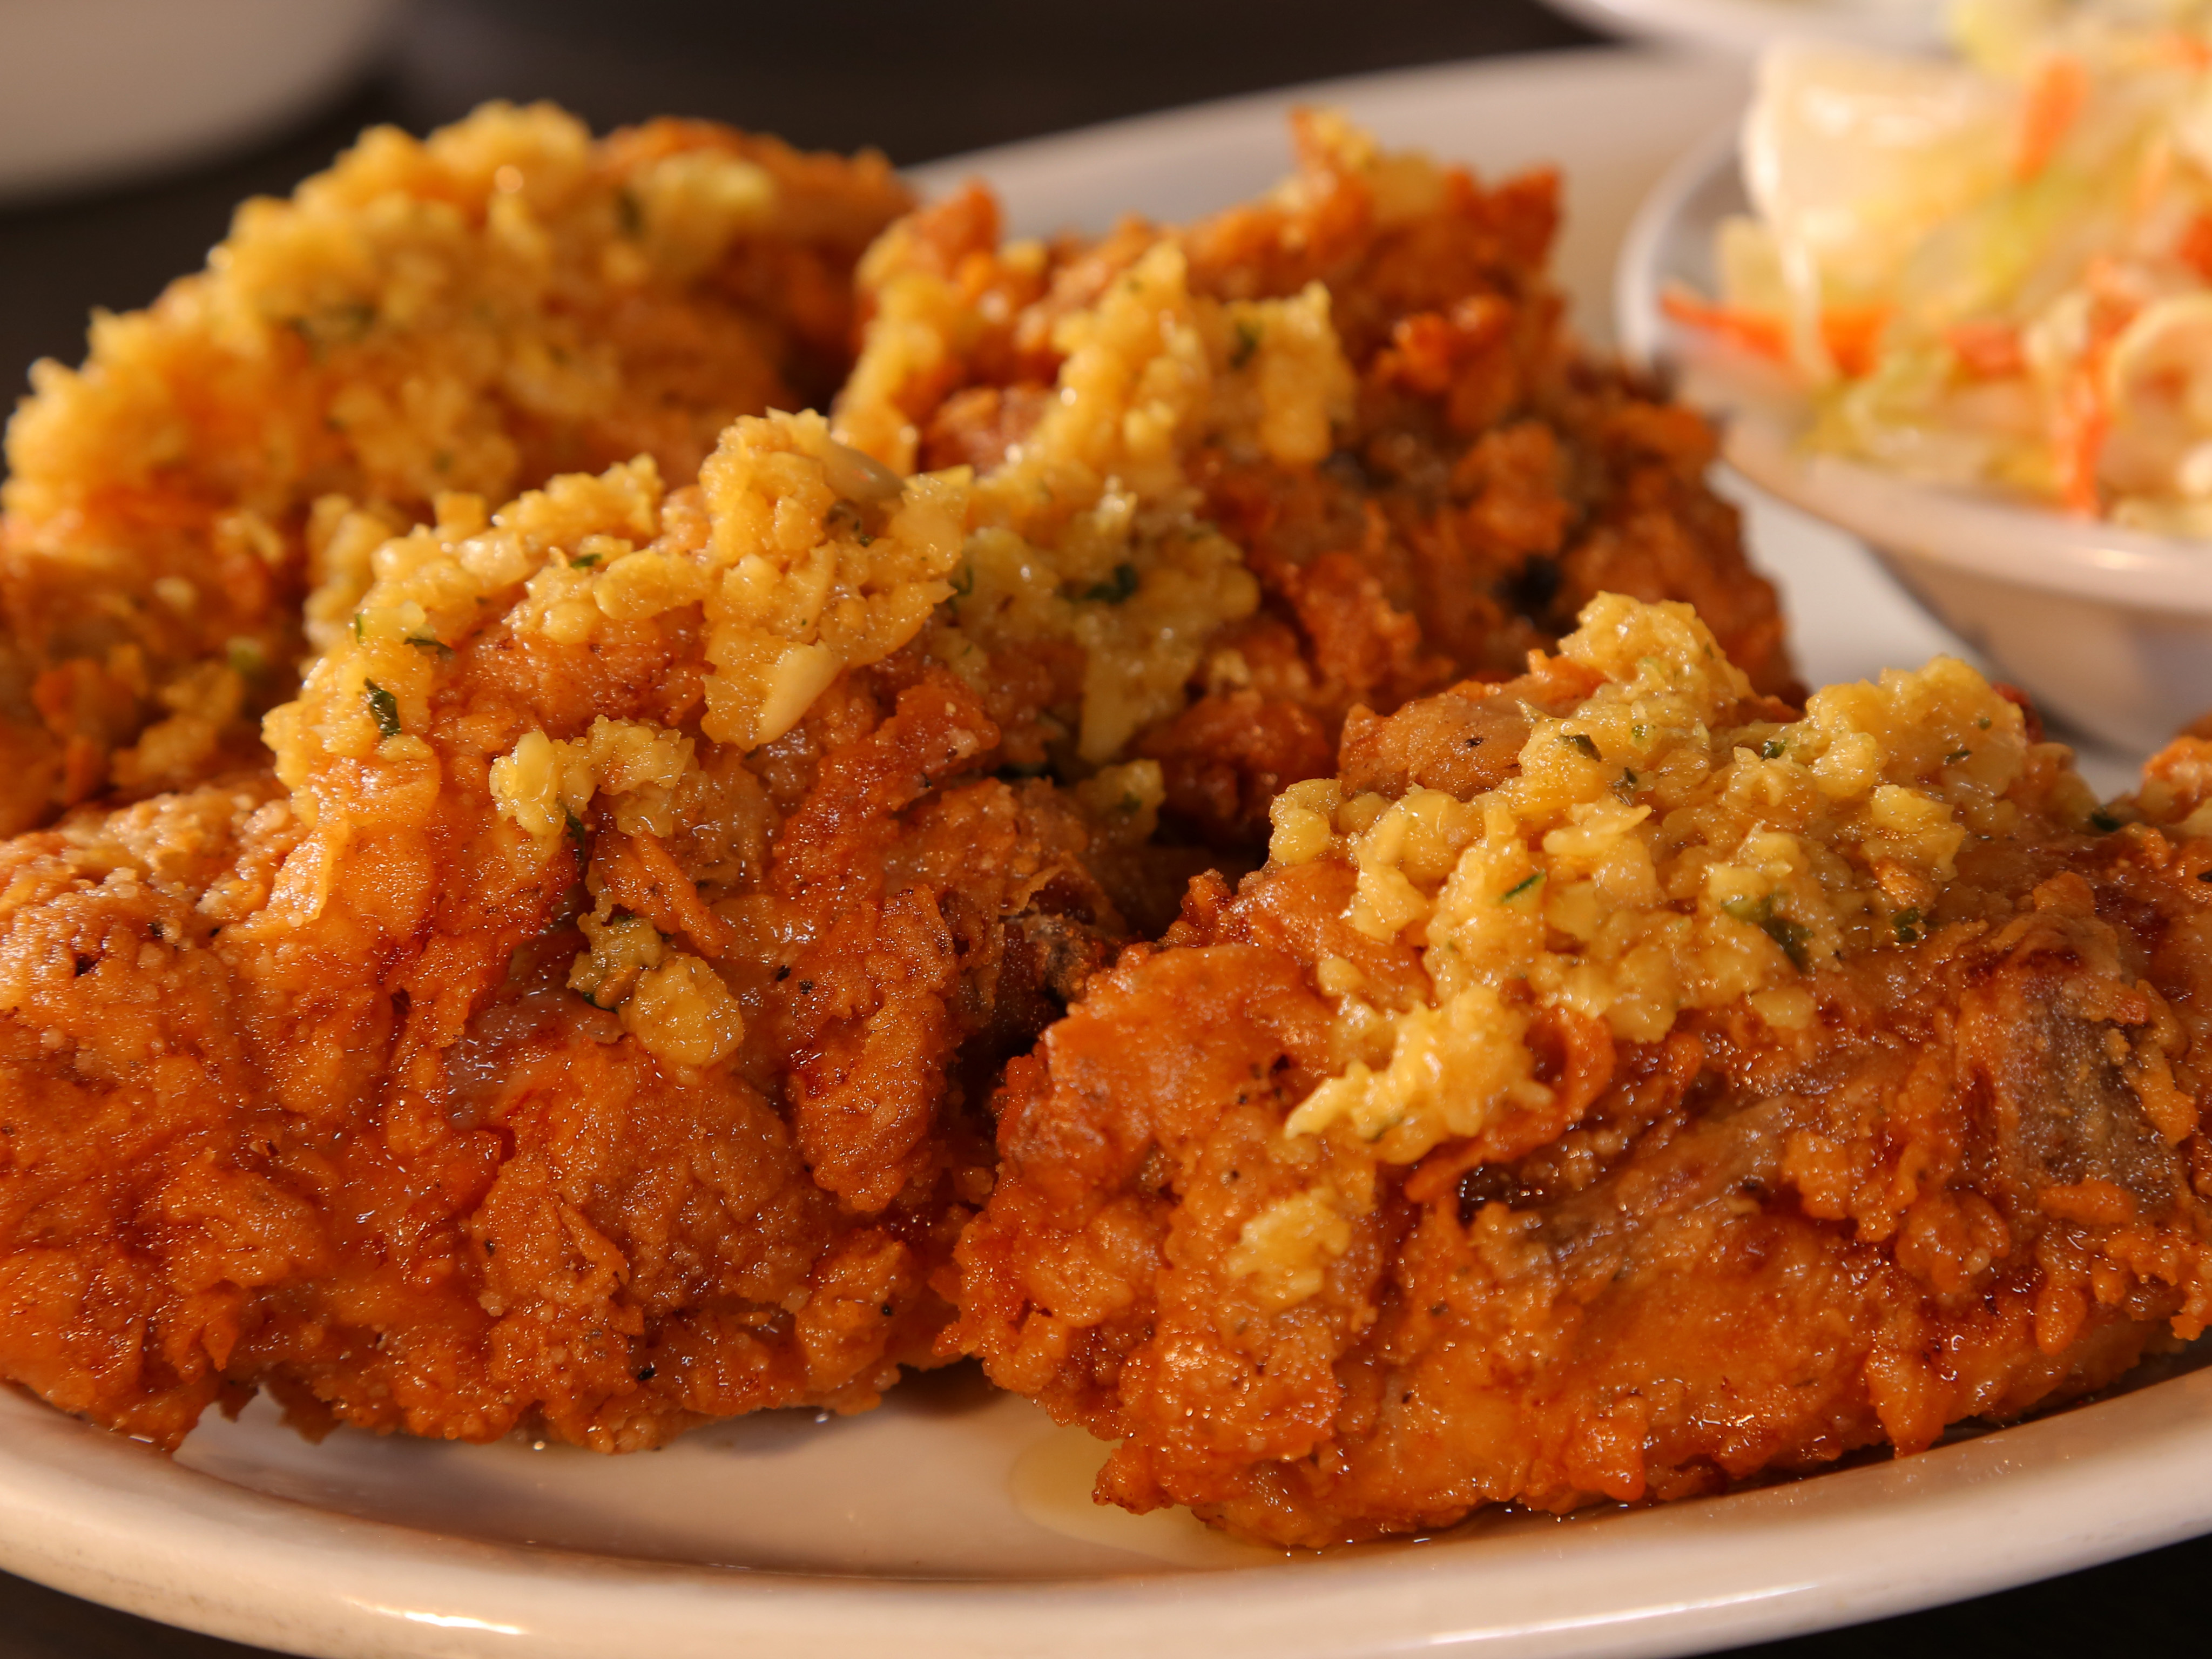 Fried Chicken Wallpaper Image Photos Pictures Background